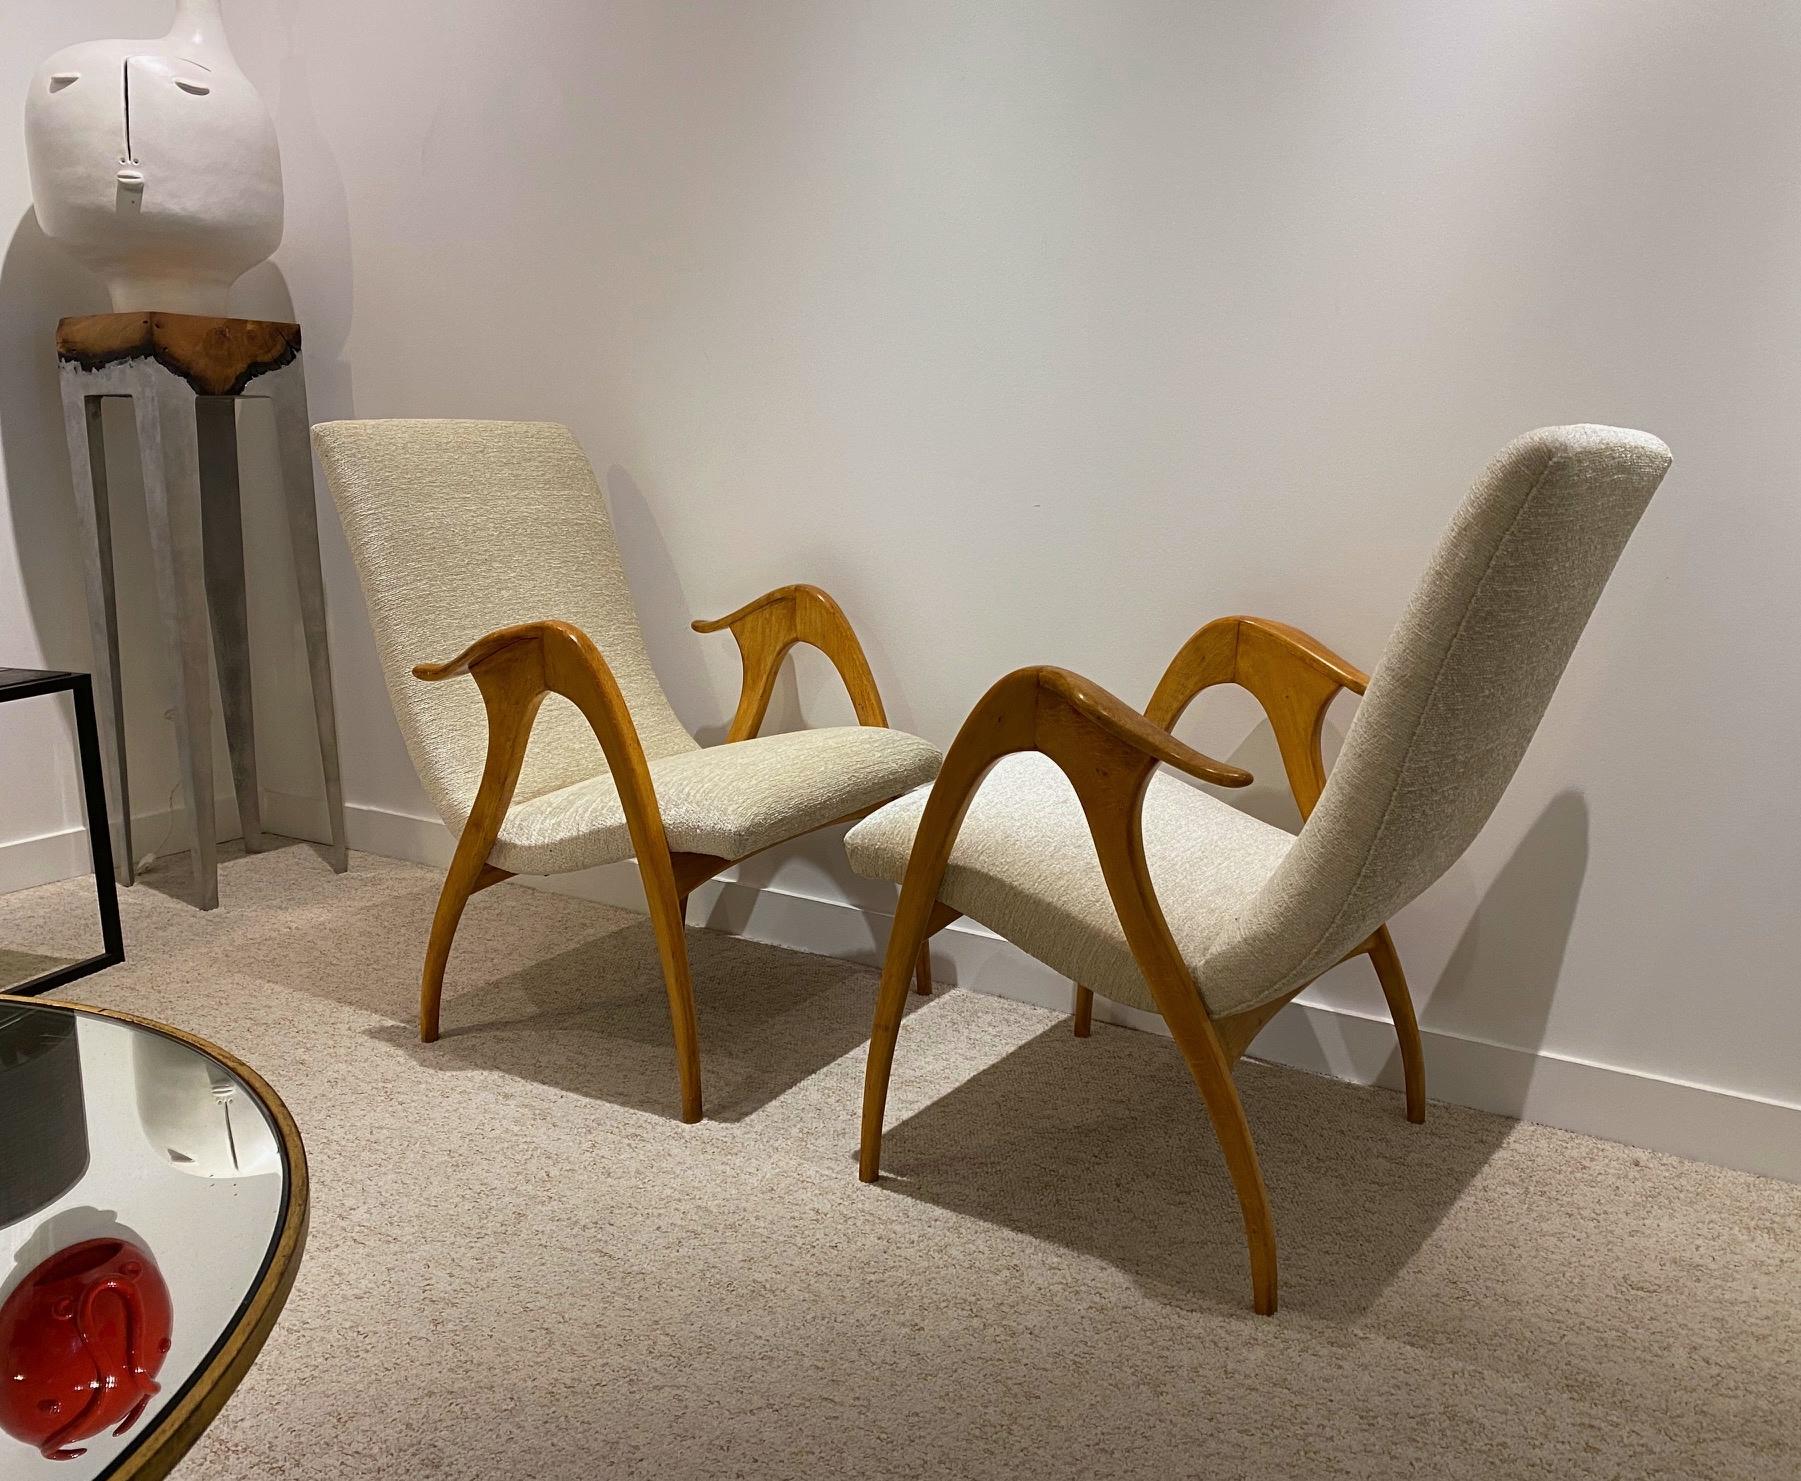 Italian Design Pair of Maple Wood Chairs by Malatesta and Masson, Italy, 1950s 1